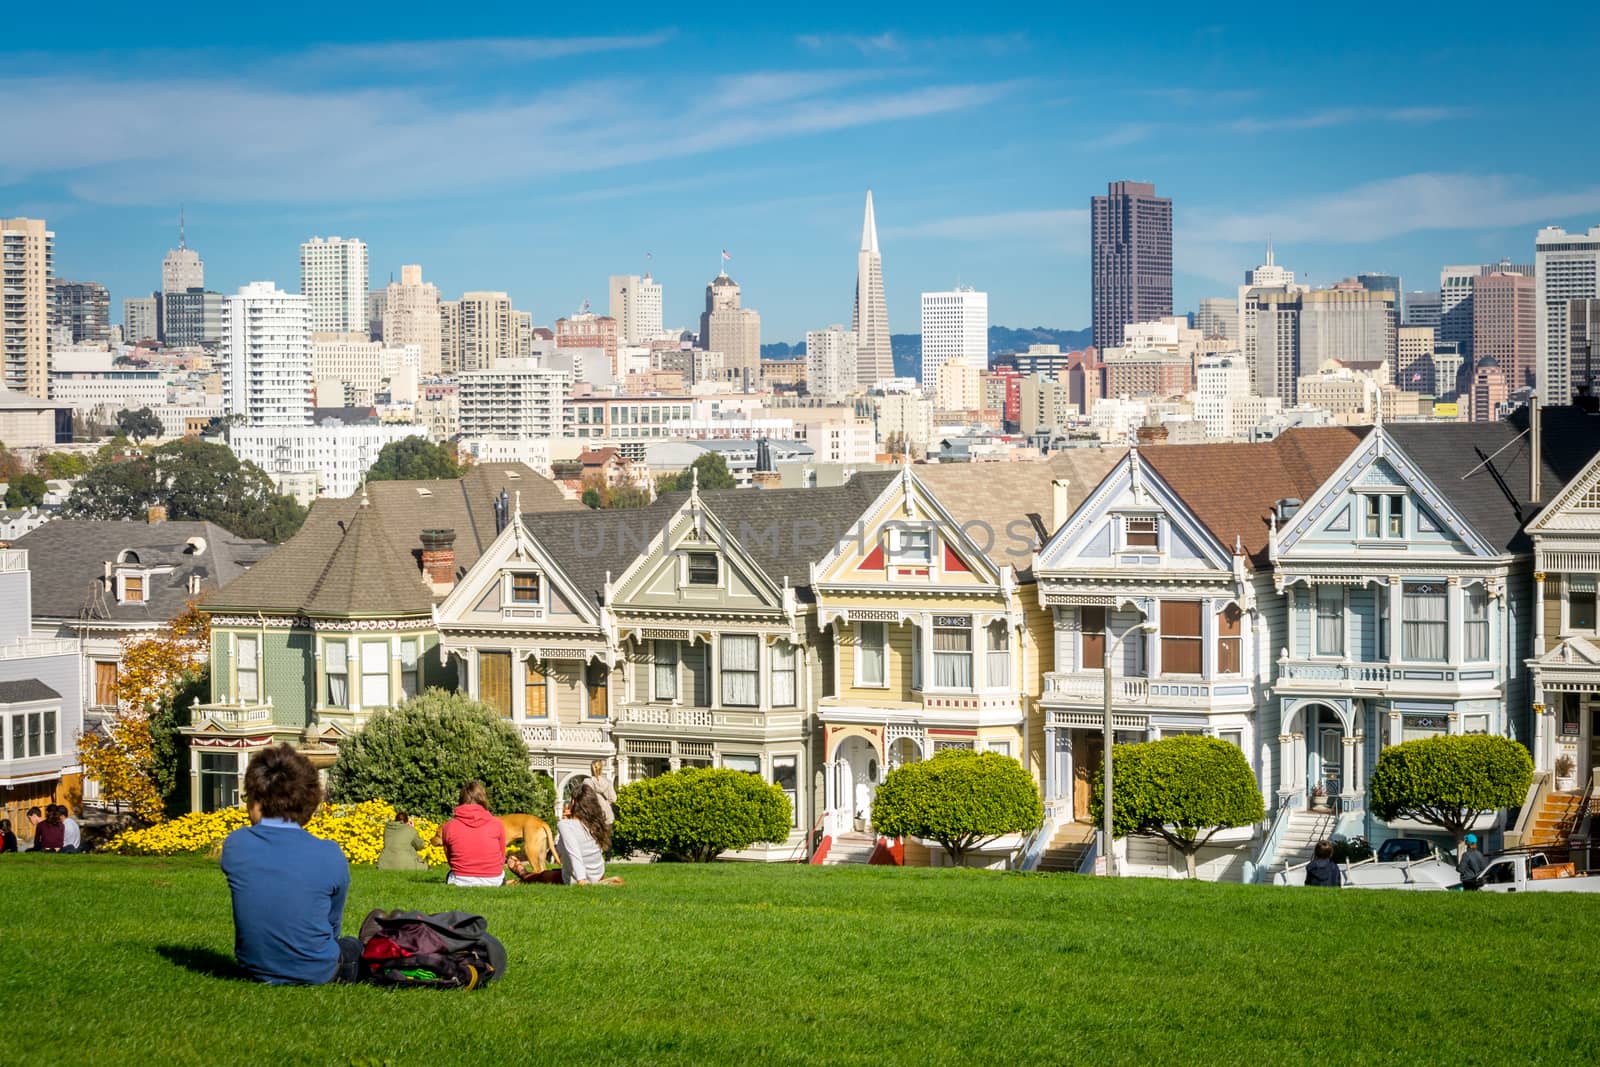 San Francisco, California, United States, November 2013: View on the Painted Ladies Victorian houses of San Francisco with cityscape and skyline in the background on a blue sky. People sitting front